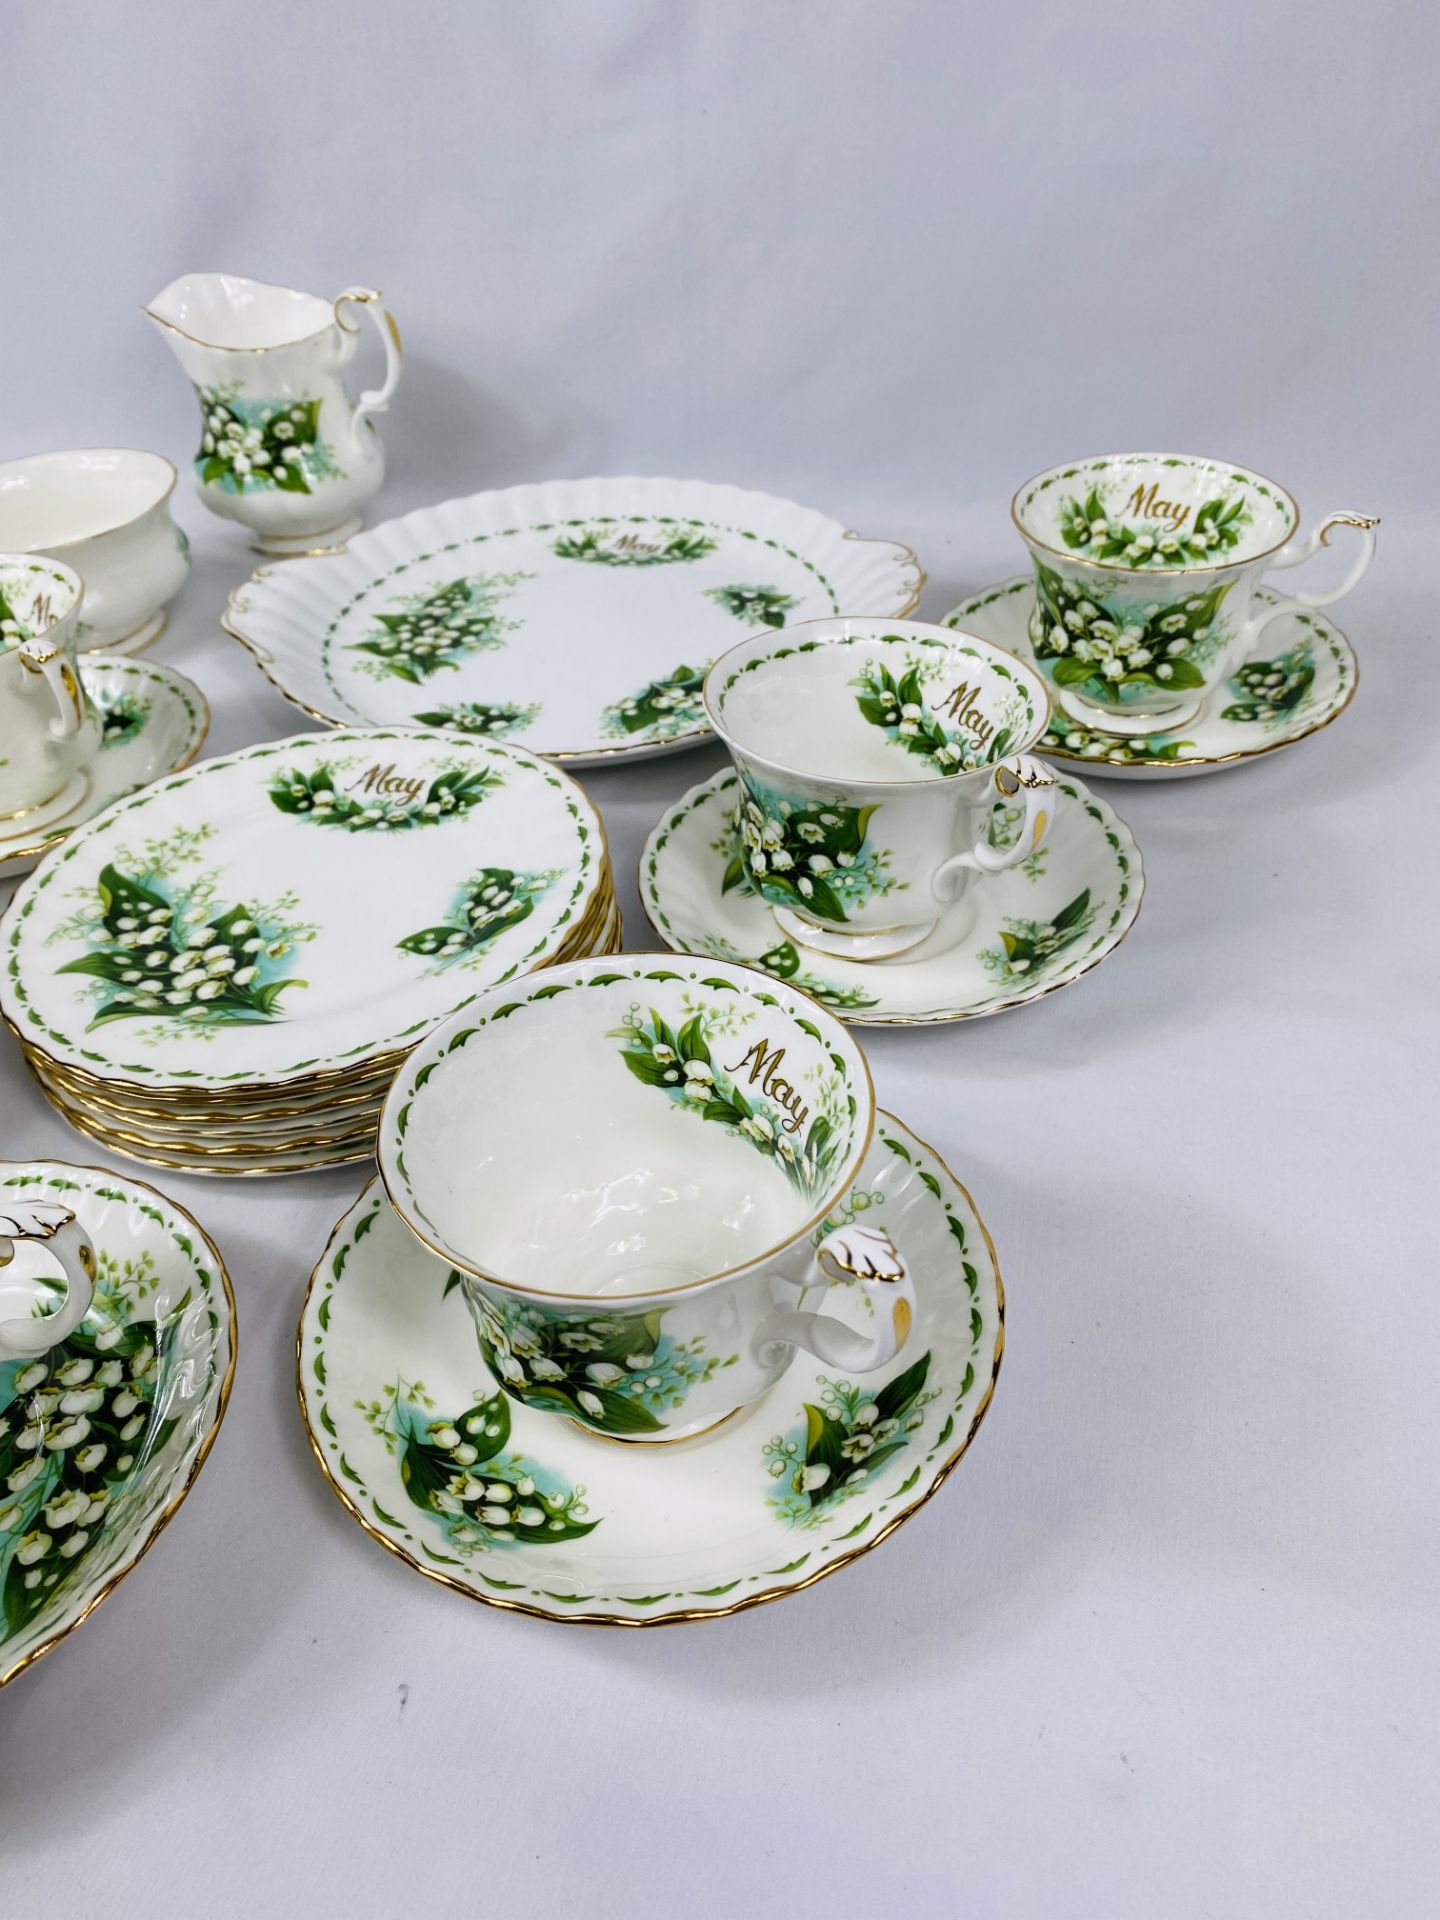 Royal Albert Lily of the Valley tea set - Image 4 of 4